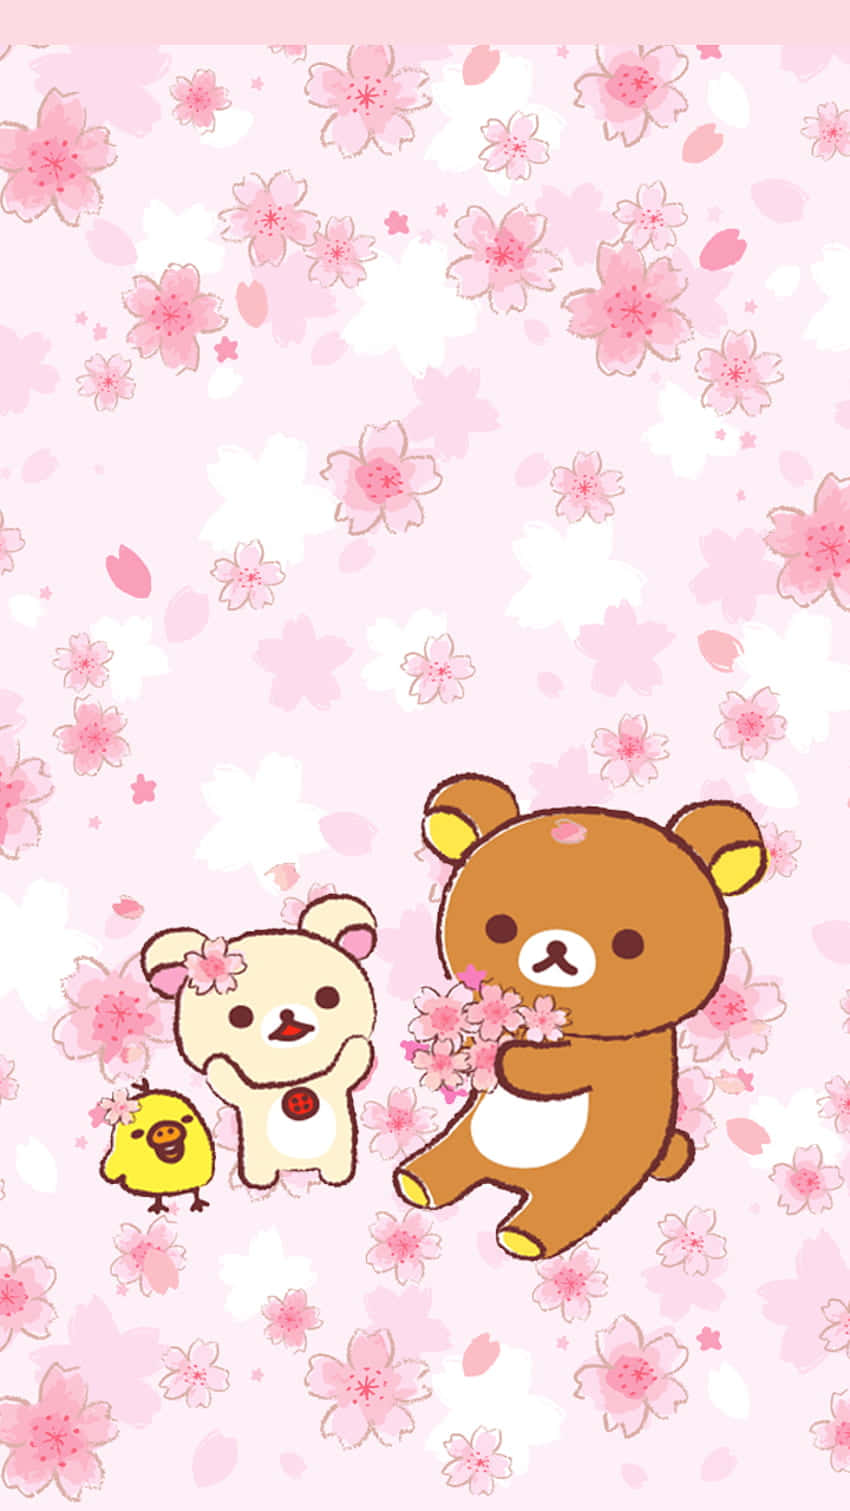 Rilakkuma Wallpapers Free for iPhone and Galaxy from Lollimobile